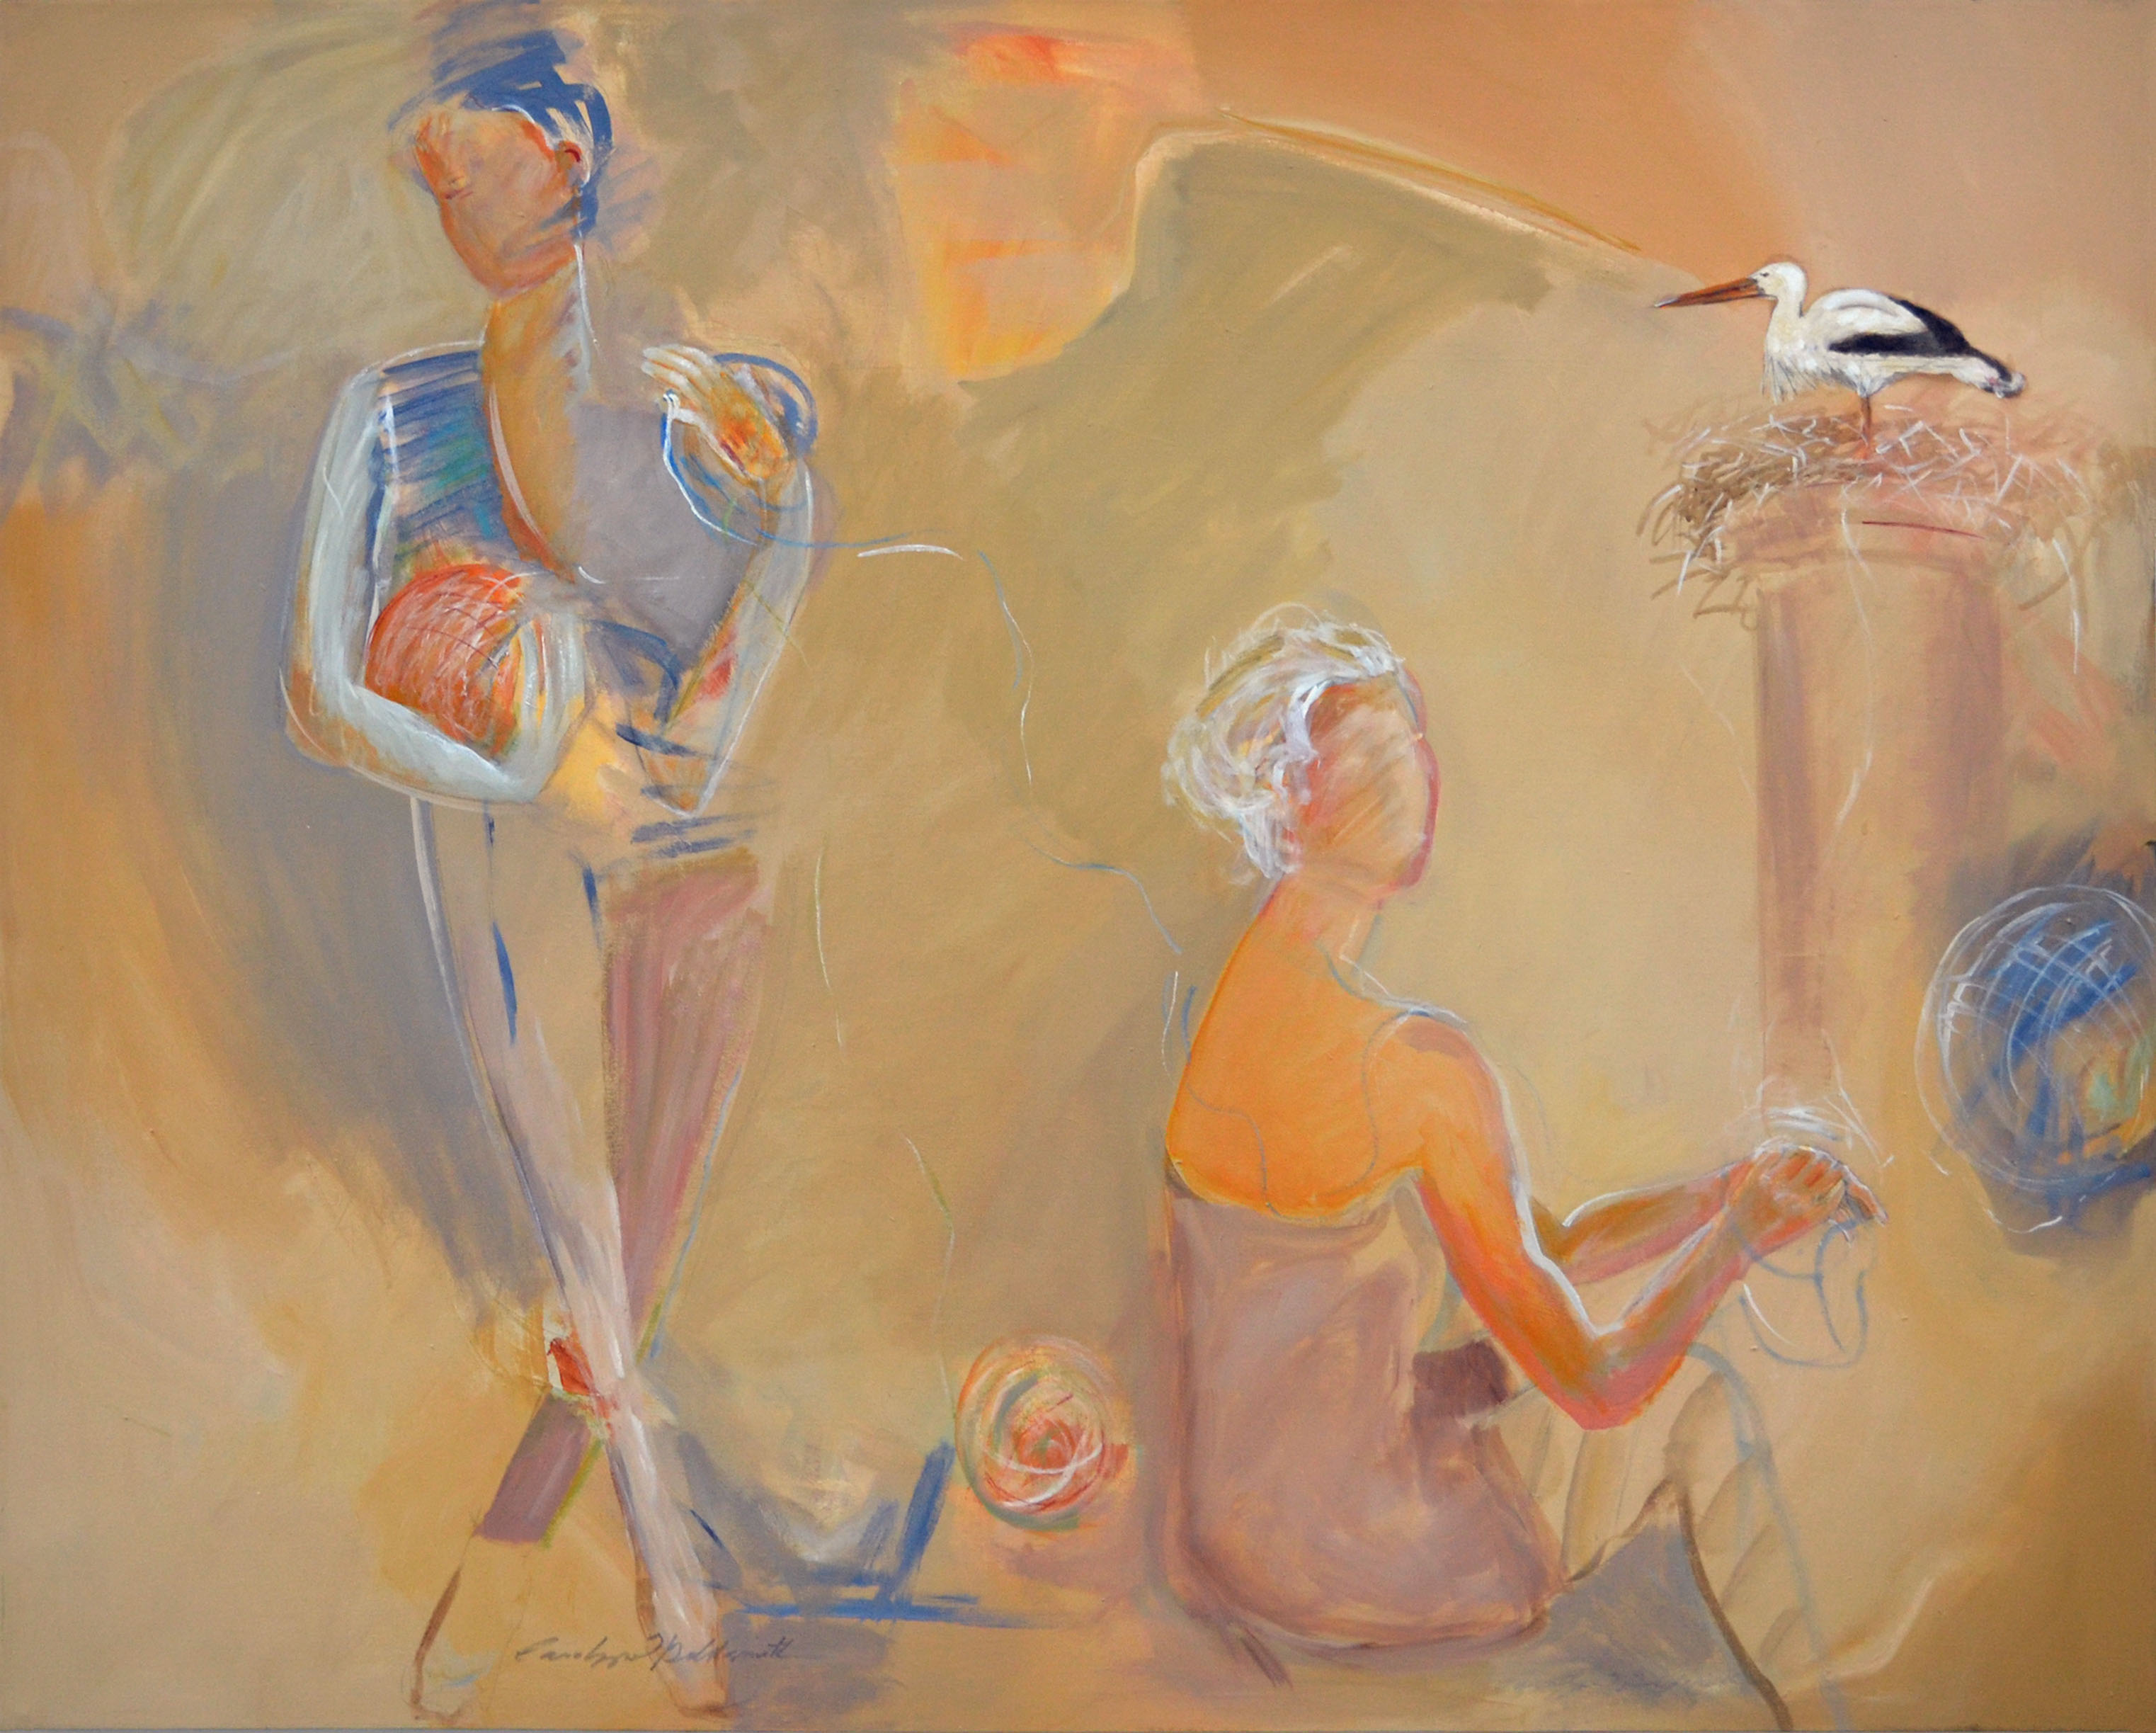 Large orange painting of women standing with a seagull